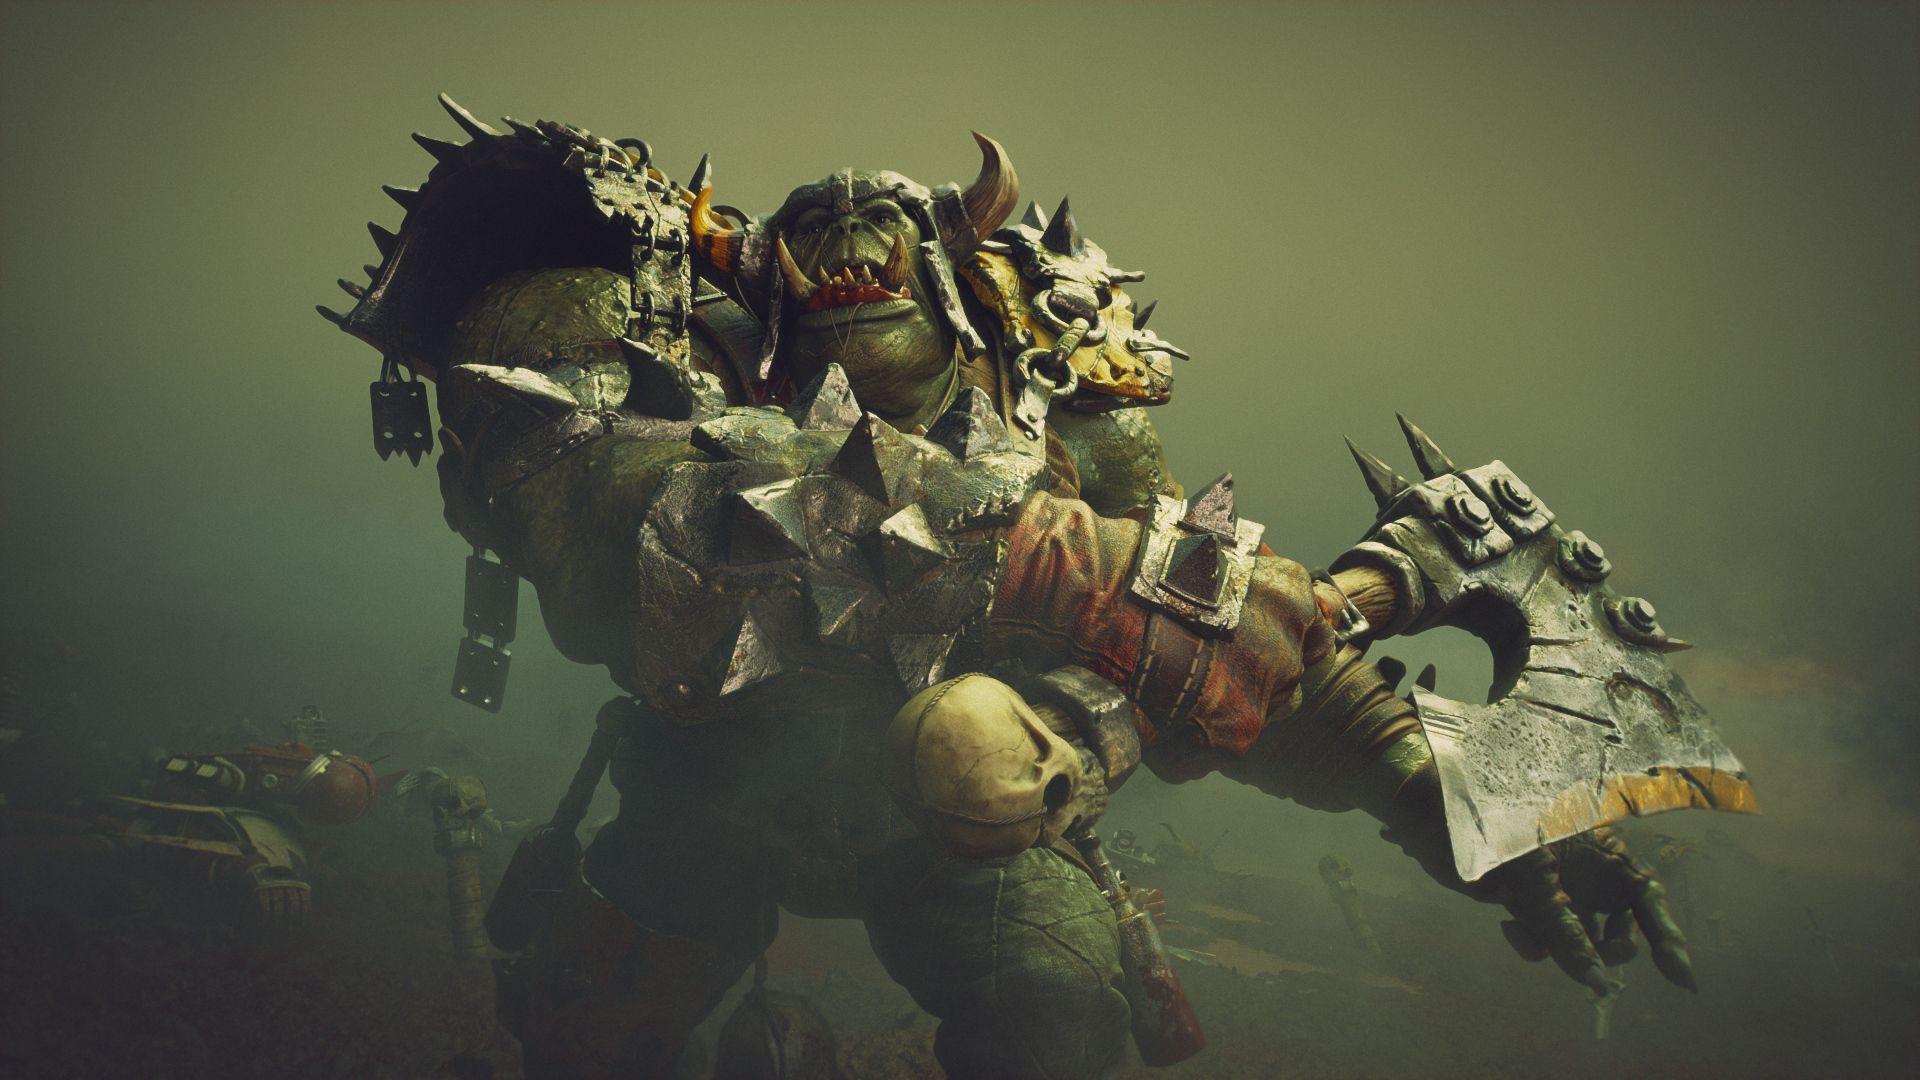 Sweet Dawn of War 3 cinematic stills are just begging to be